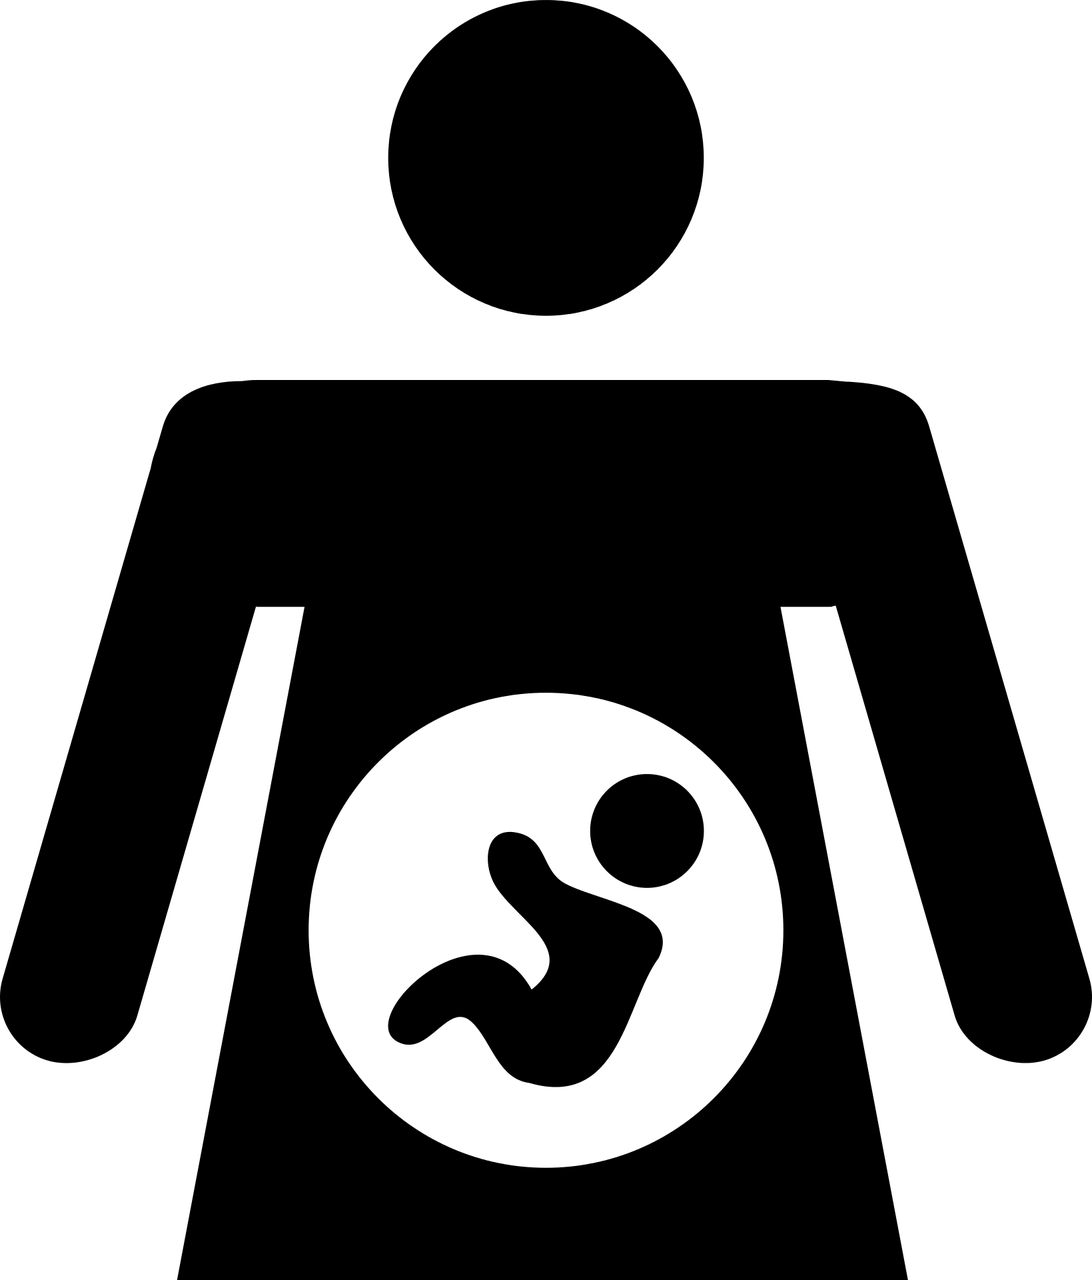 clipart baby womb